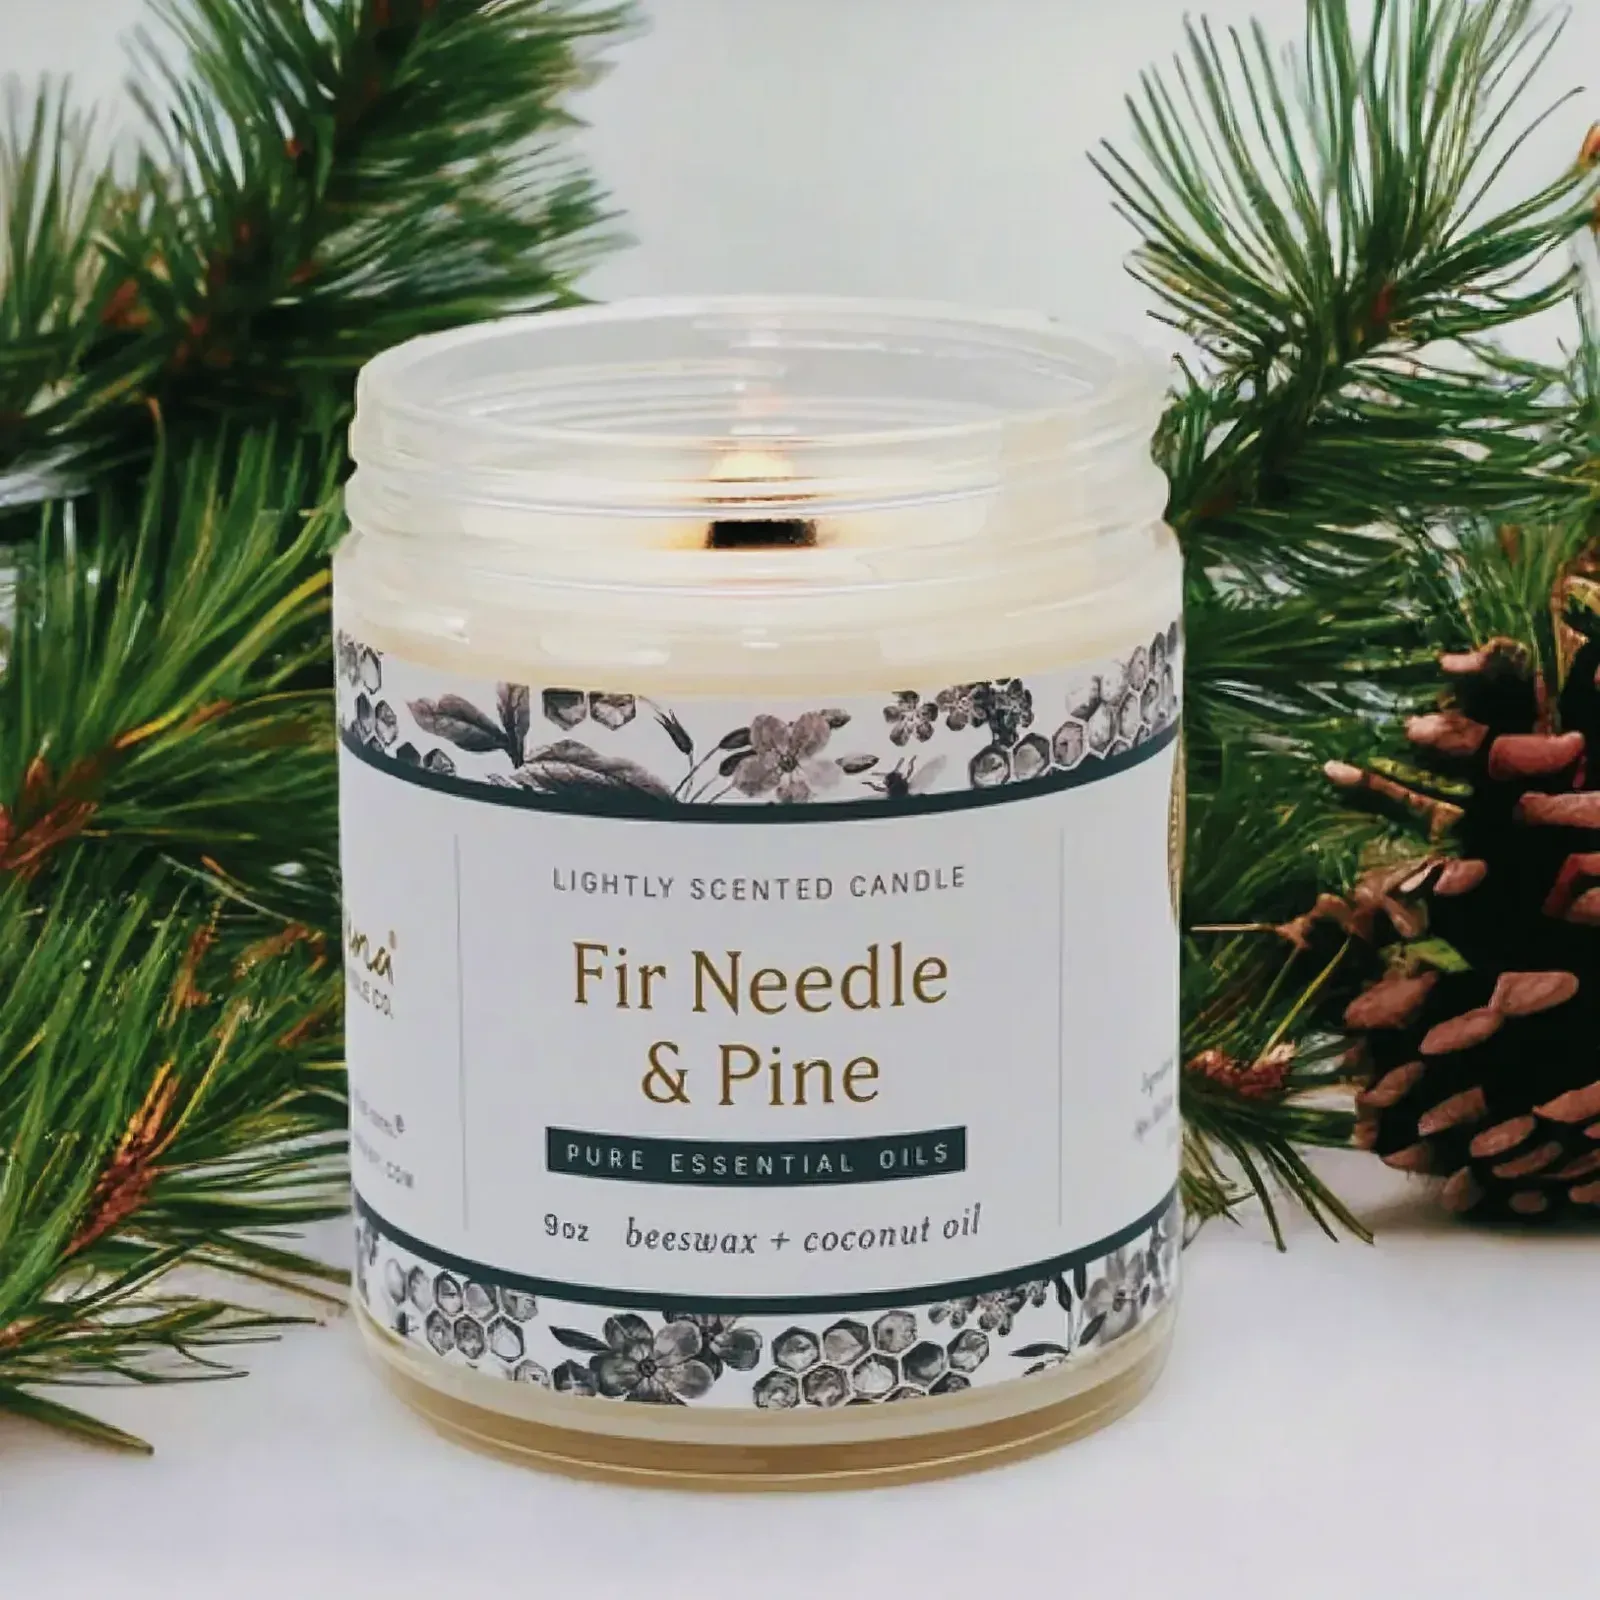 Tranquil Christmas candle with pine branches